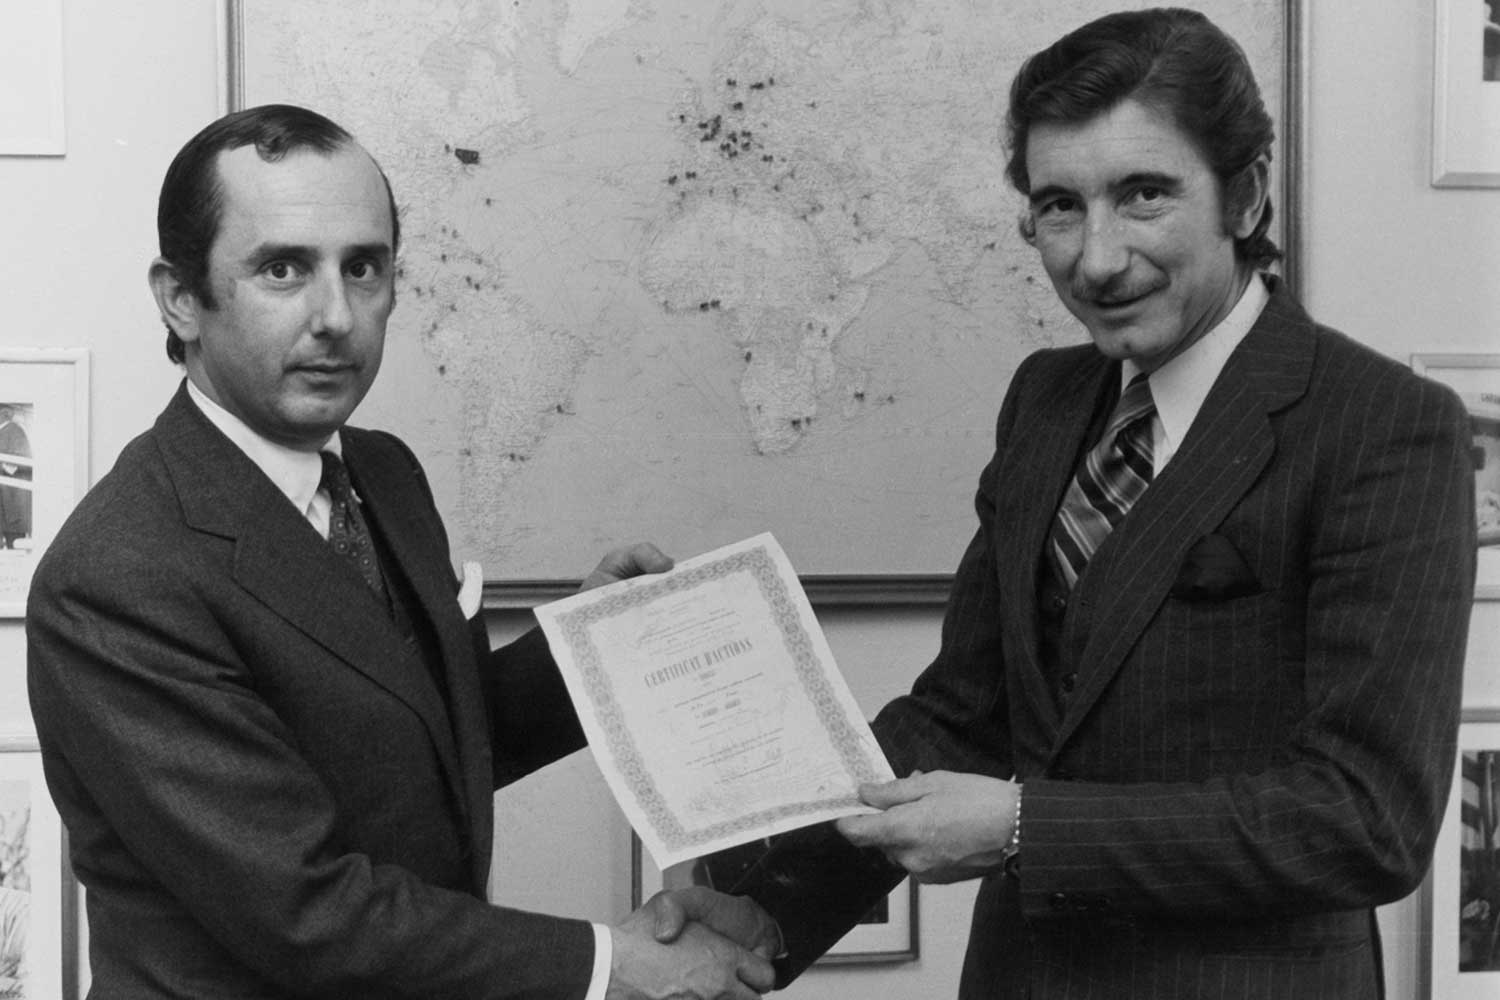 Jack Heuer (left) with Jo Siffert. Siffert was one of the first Formula 1 drivers to be sponsored by a watch company when Heuer signed a partnership deal with him in 1968